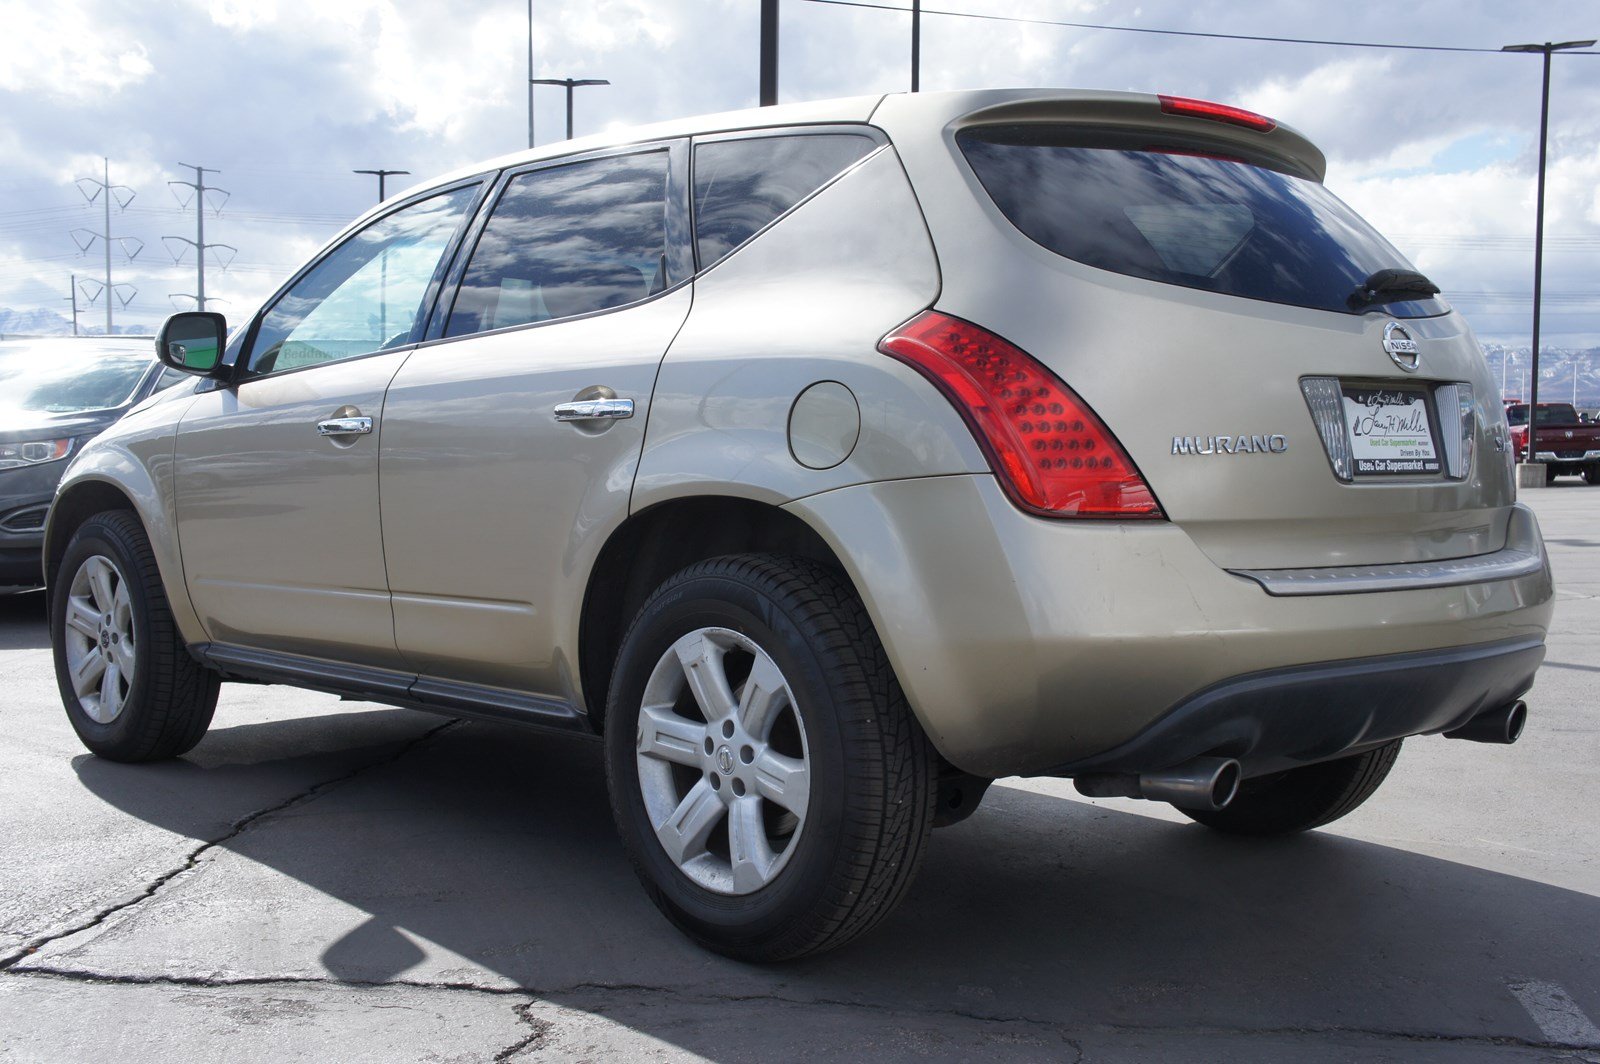 PreOwned 2006 Nissan Murano S Sport Utility in Riverdale S7032A